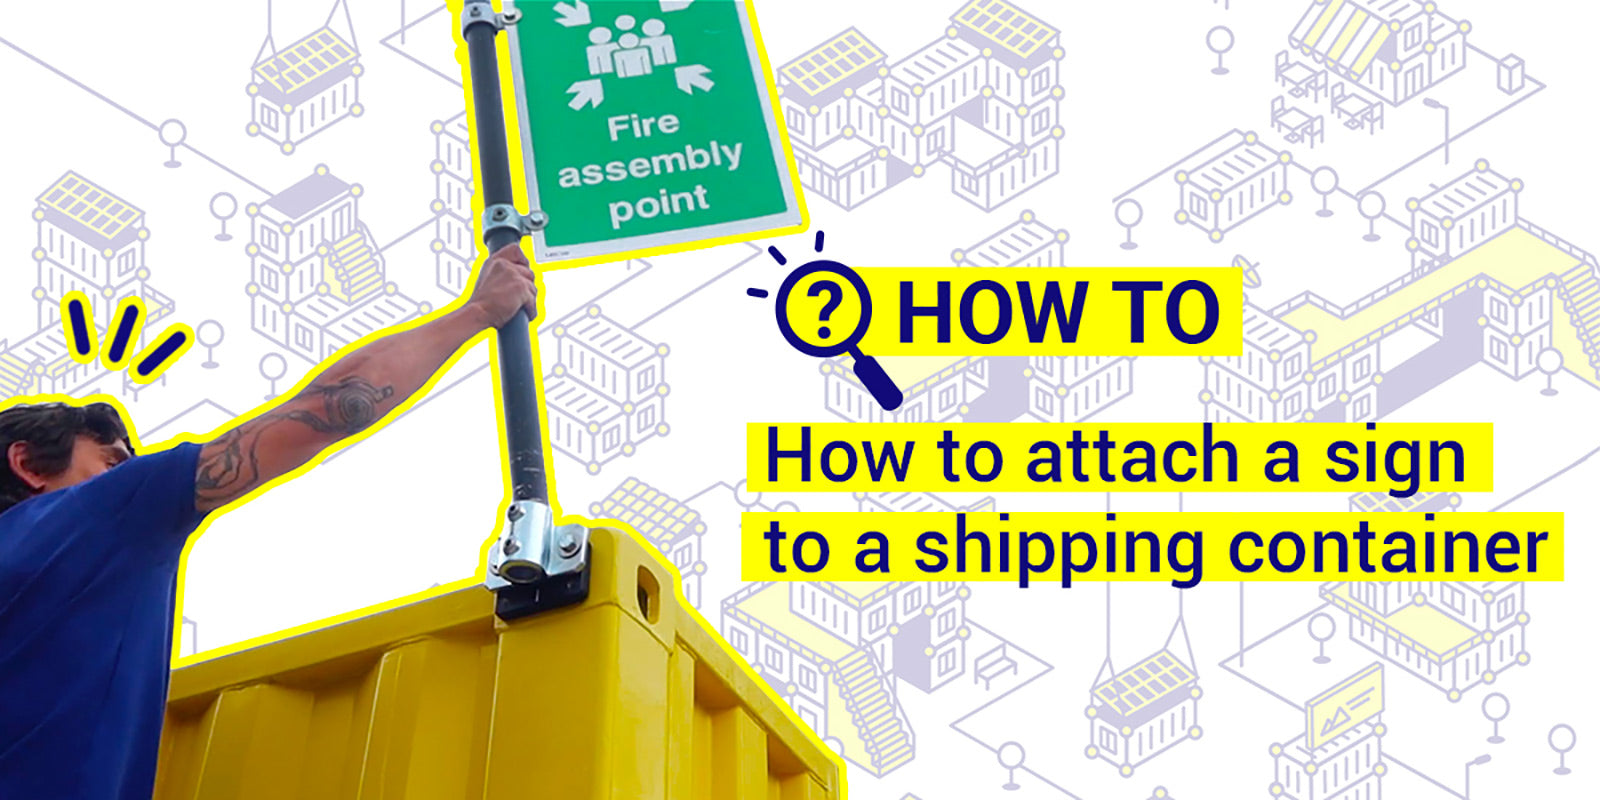 How to attach a sign to a shipping container.